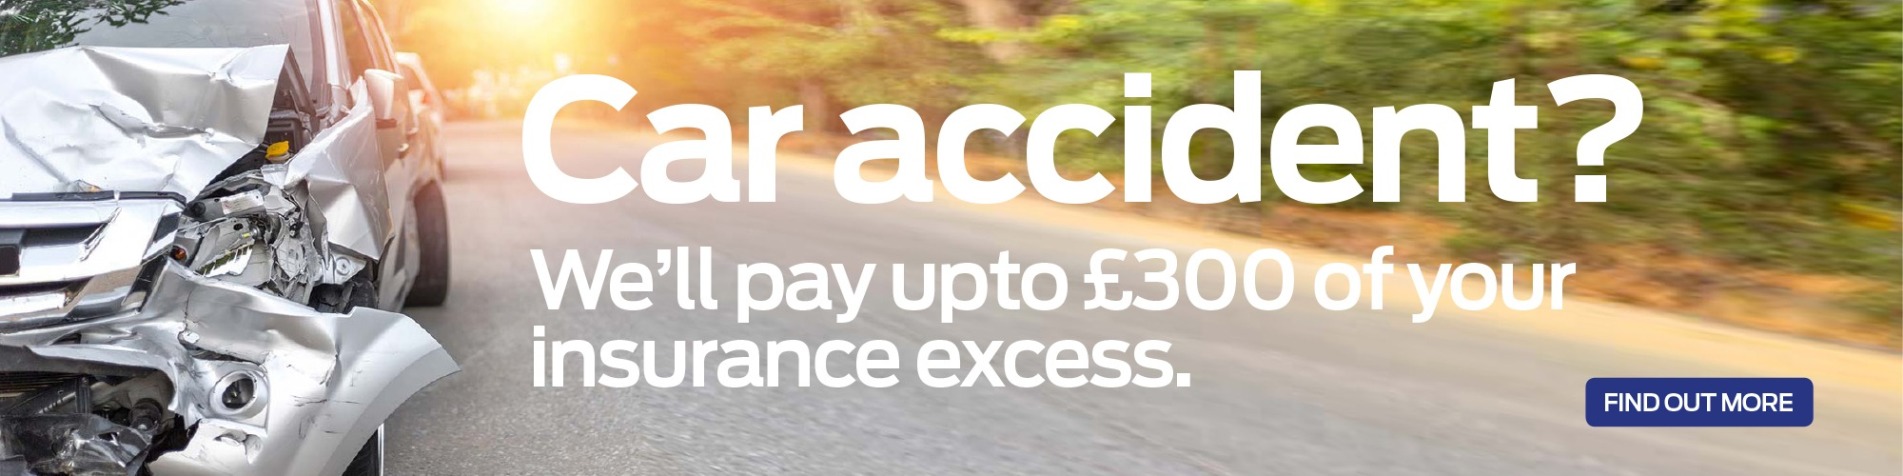 Get up to £300 towards your insurance excess